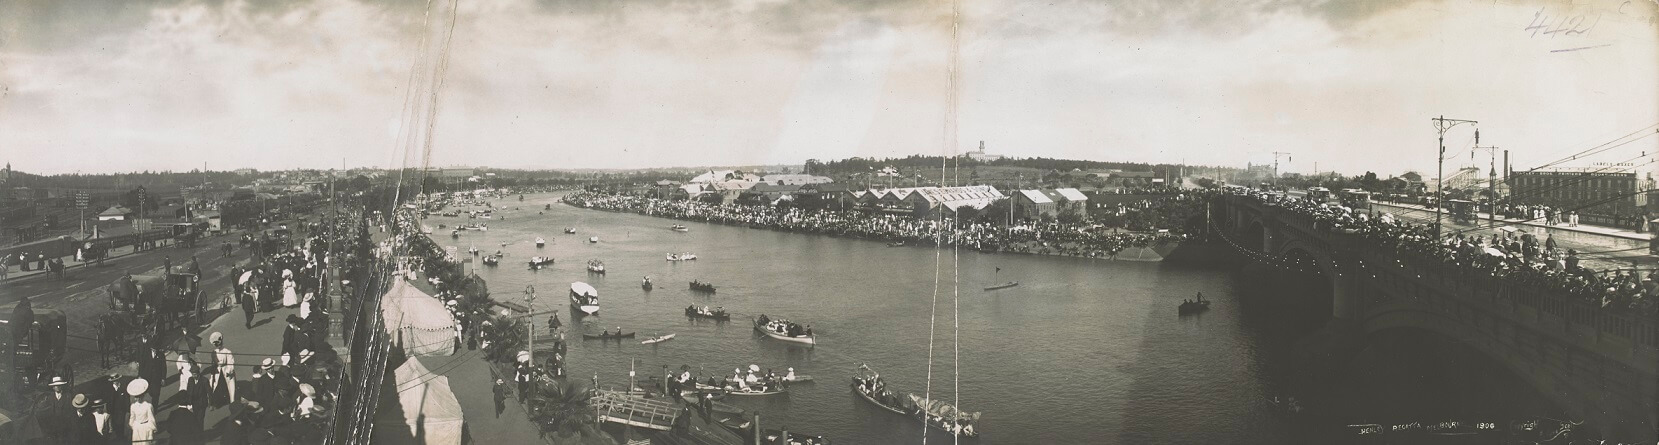 black and white image with two vertical lines indicating damage. It shows a lively event on a river. To the right of the image is a bridge crossing the river, with people lined up along the edge shoulder to shoulder. Along the left side of the river is a collection of boats, small and large (8 persons). The right bank has large temporary structures. People line both banks, all wearing hats and some carrying parasols. 